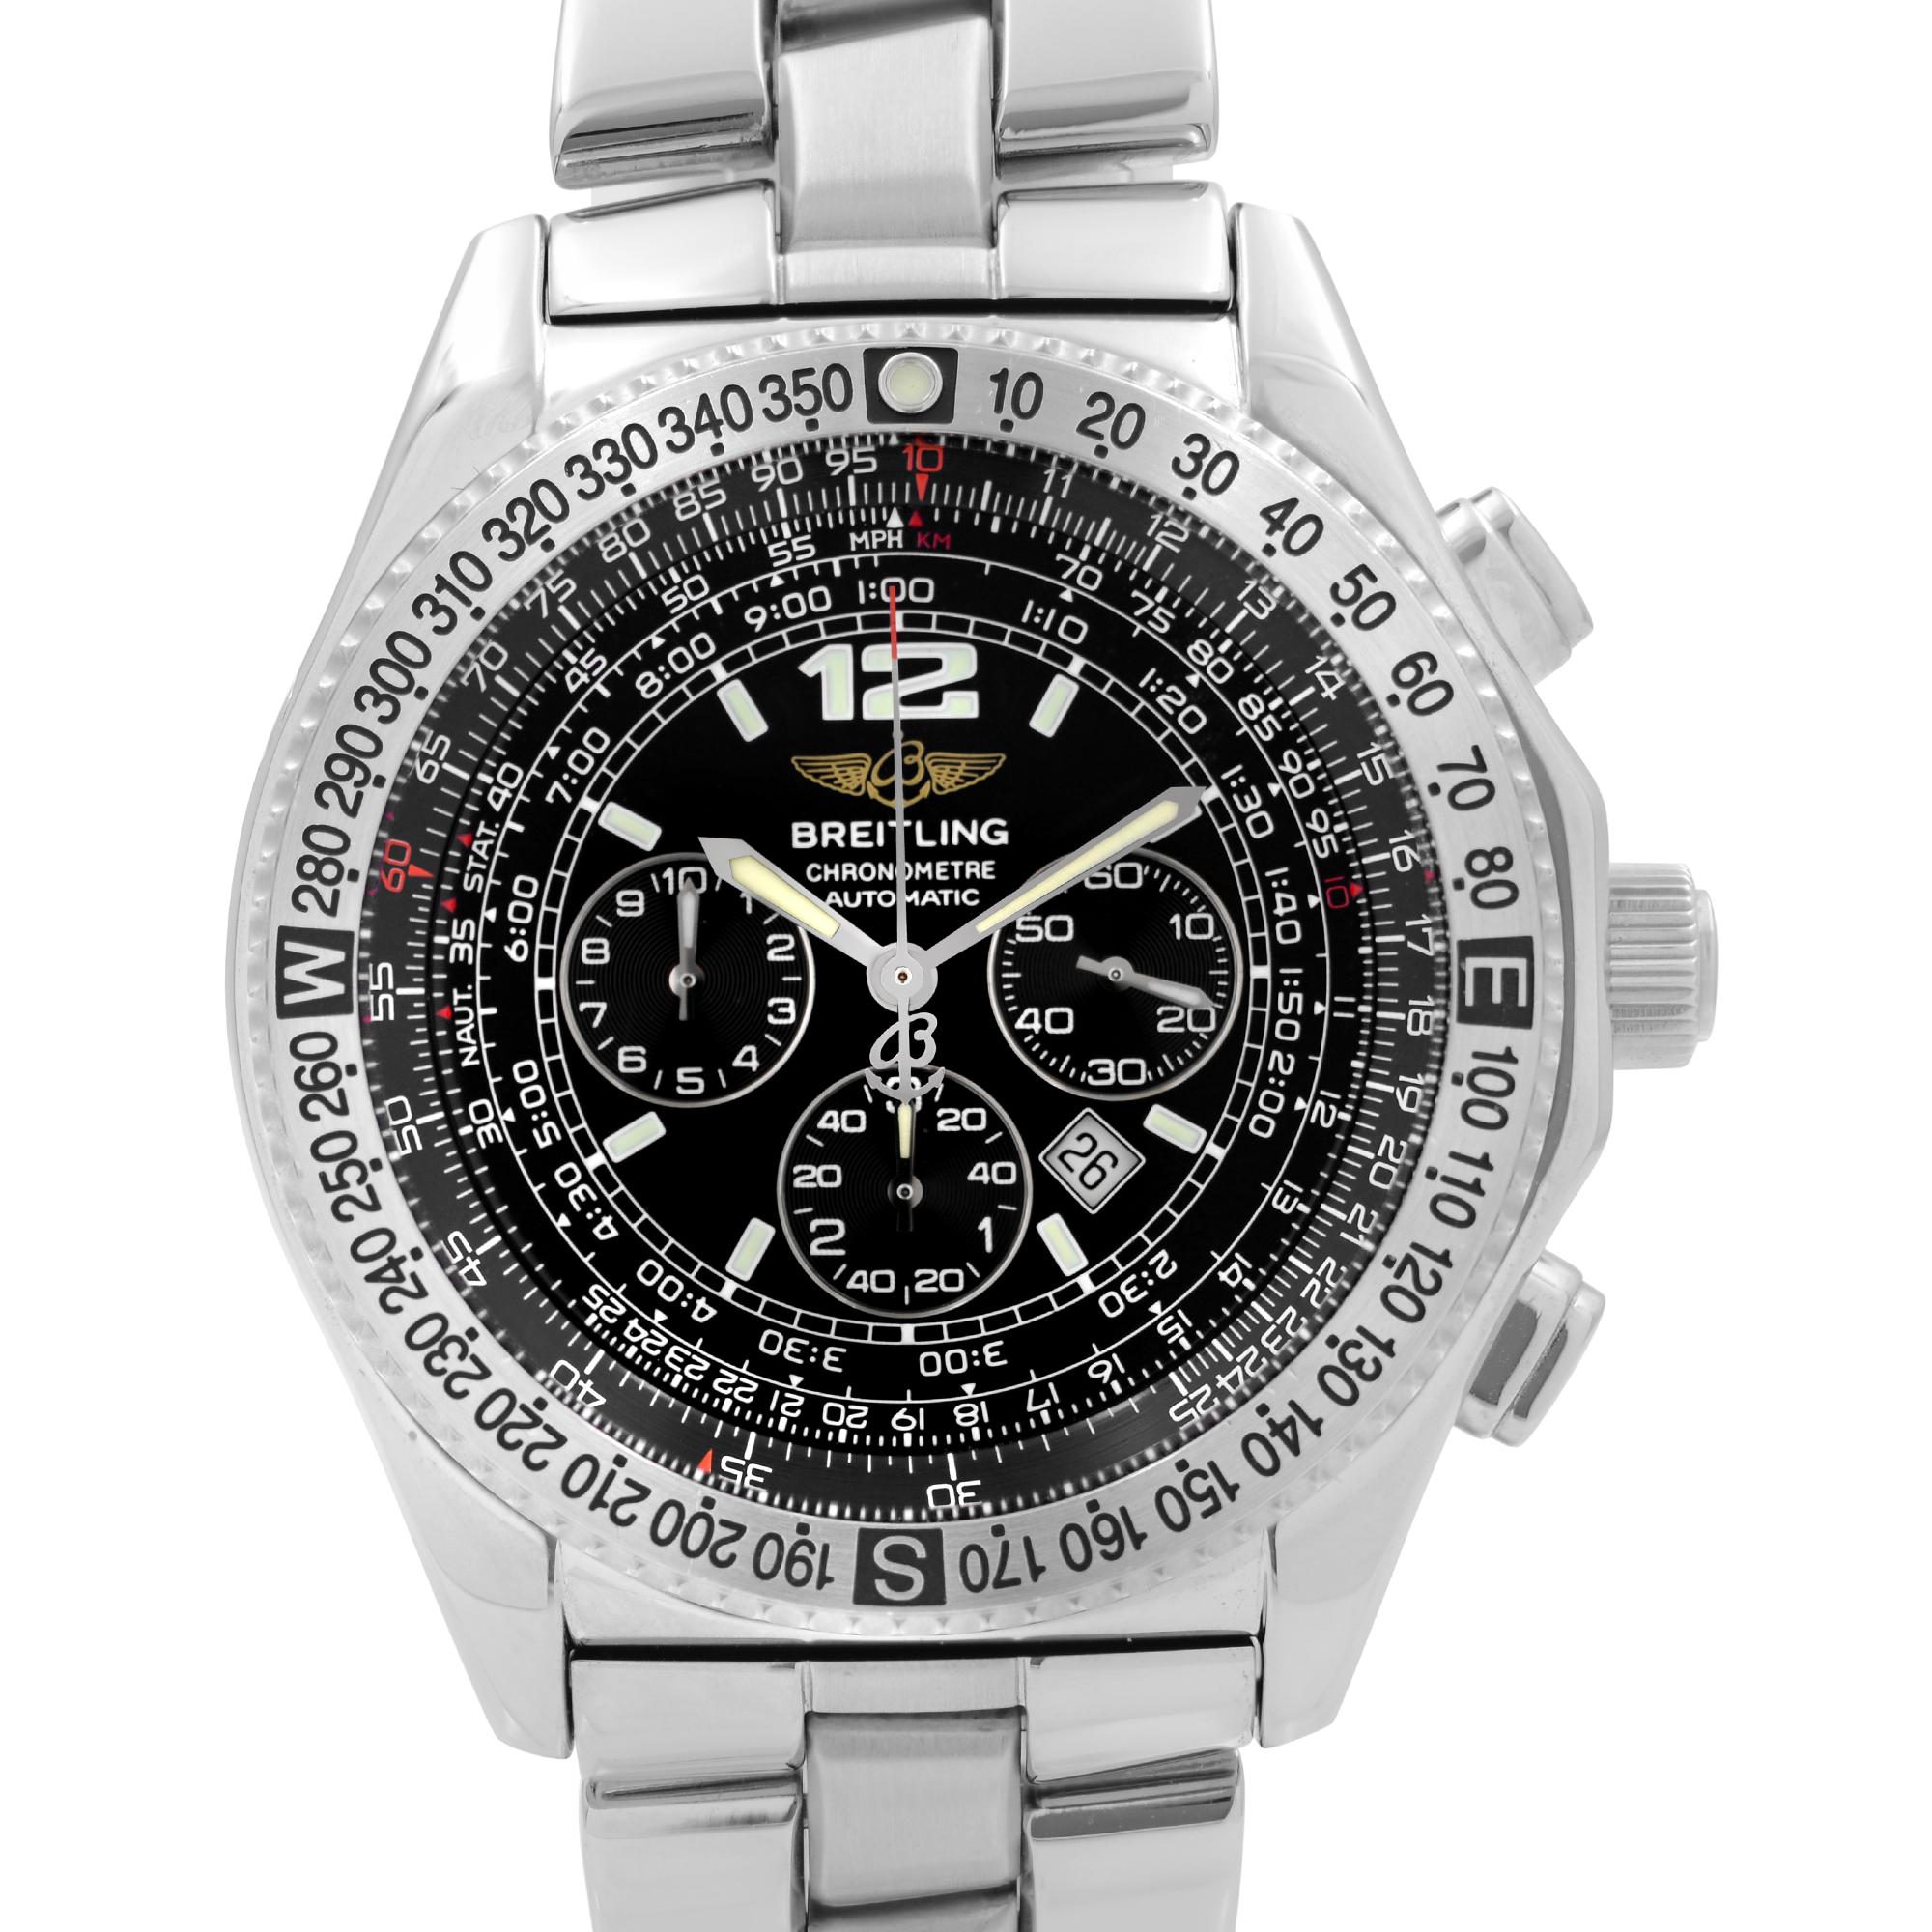 Pre-owned Breitling B2 Stainless Steel Chronograph Black Dial Automatic Men's Watch A42362. This Beautiful Timepiece Features: Stainless Steel Case and Bracelet. Bi-Directional Stainless Steel Bezel. Black Dial with Luminous Silver-Tone Hands Index